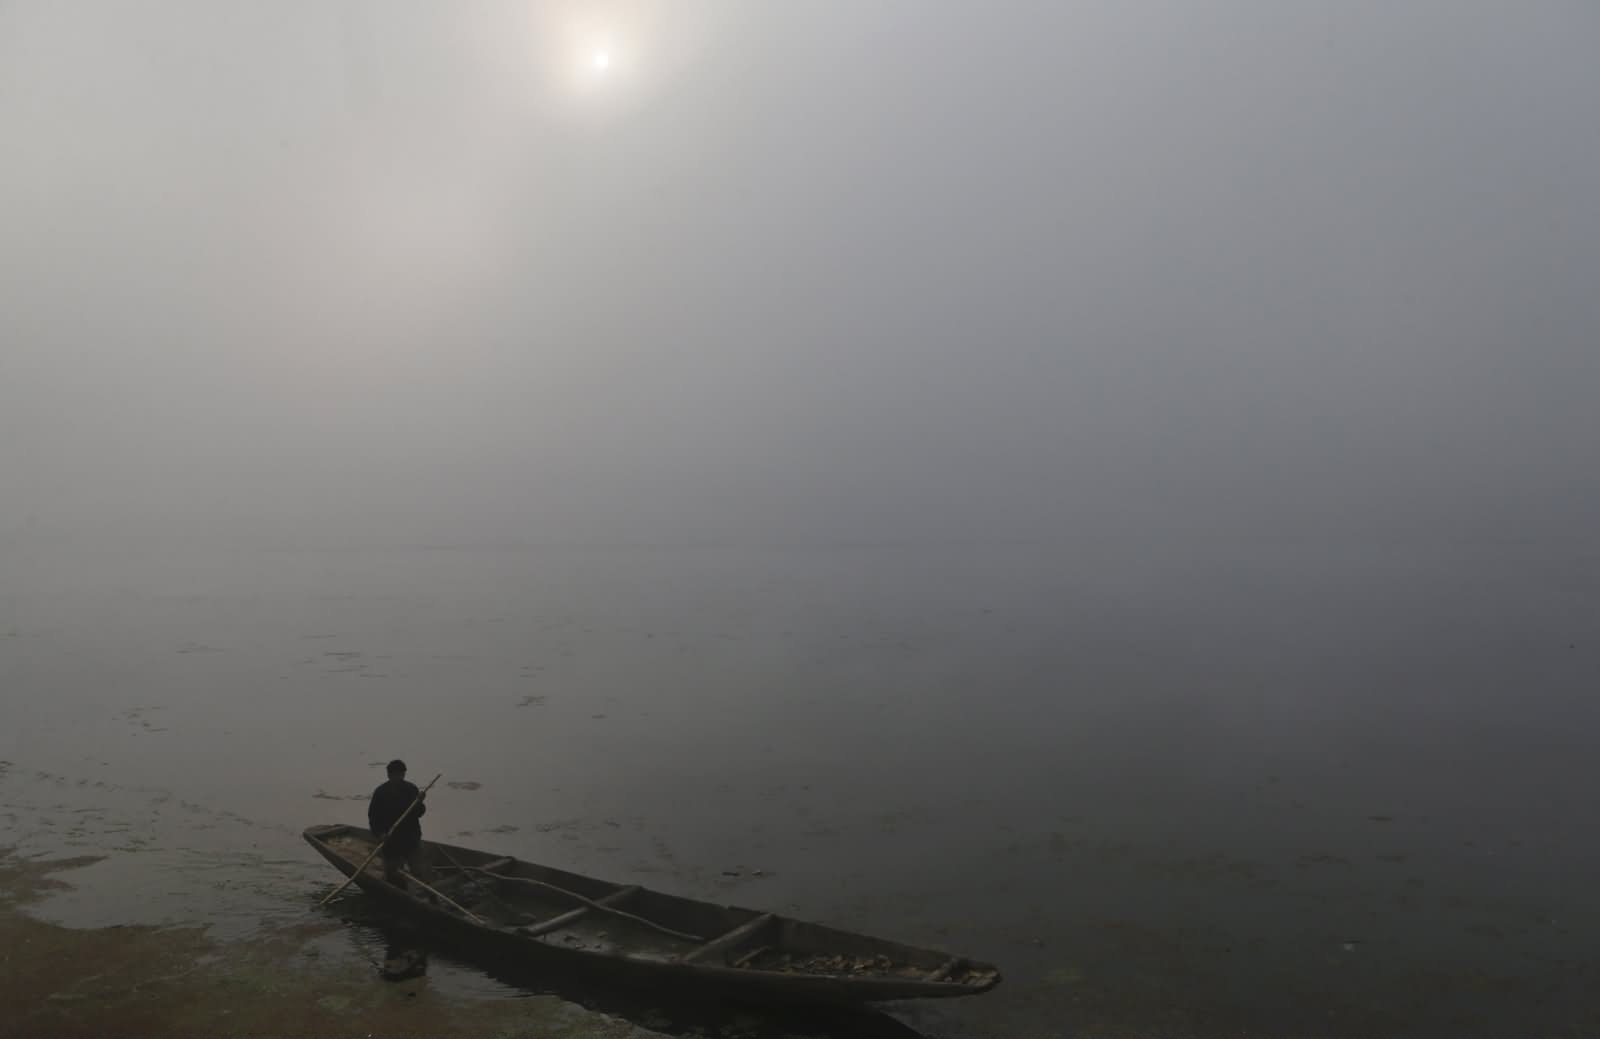 A Kashmiri Boatman Rows His Boat On The Dal Lake Surrounded By Dense Fog In Winter Season